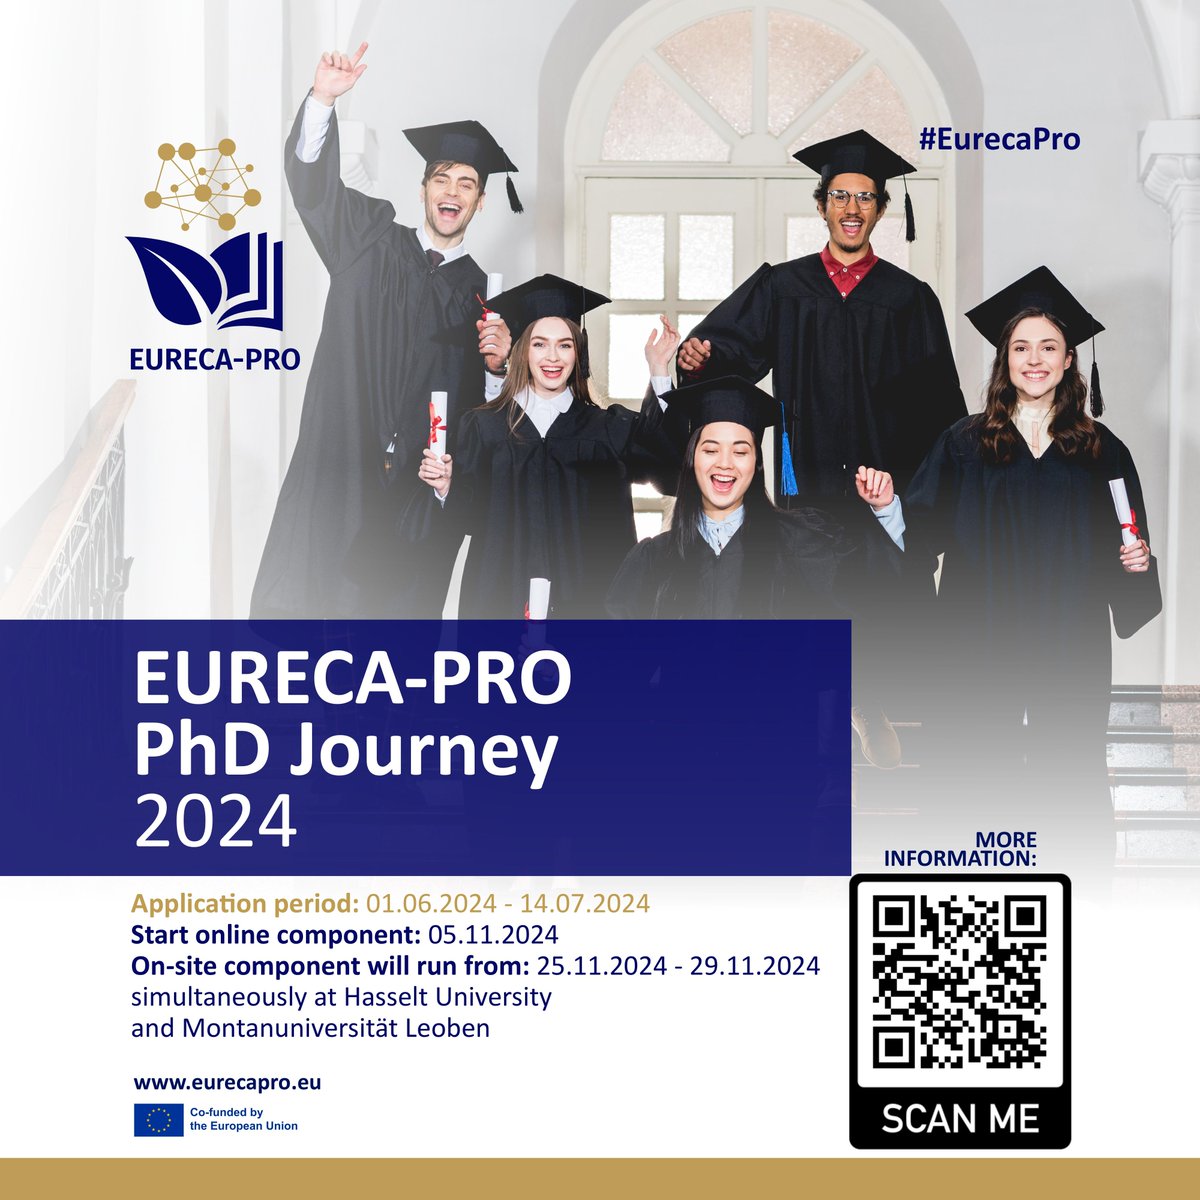 ❗This is your chance❗

✈️ Be part of the EURECA-PRO PhD Journey 2024

⏳ The application will be opening soon, so stay tuned for more details. 

 👉 More information: eurecapro.eu/phd-journey/

 #eurecapro #SDG12 #responsibleproduction #ResponsibleConsumption #PhD #phdjourney